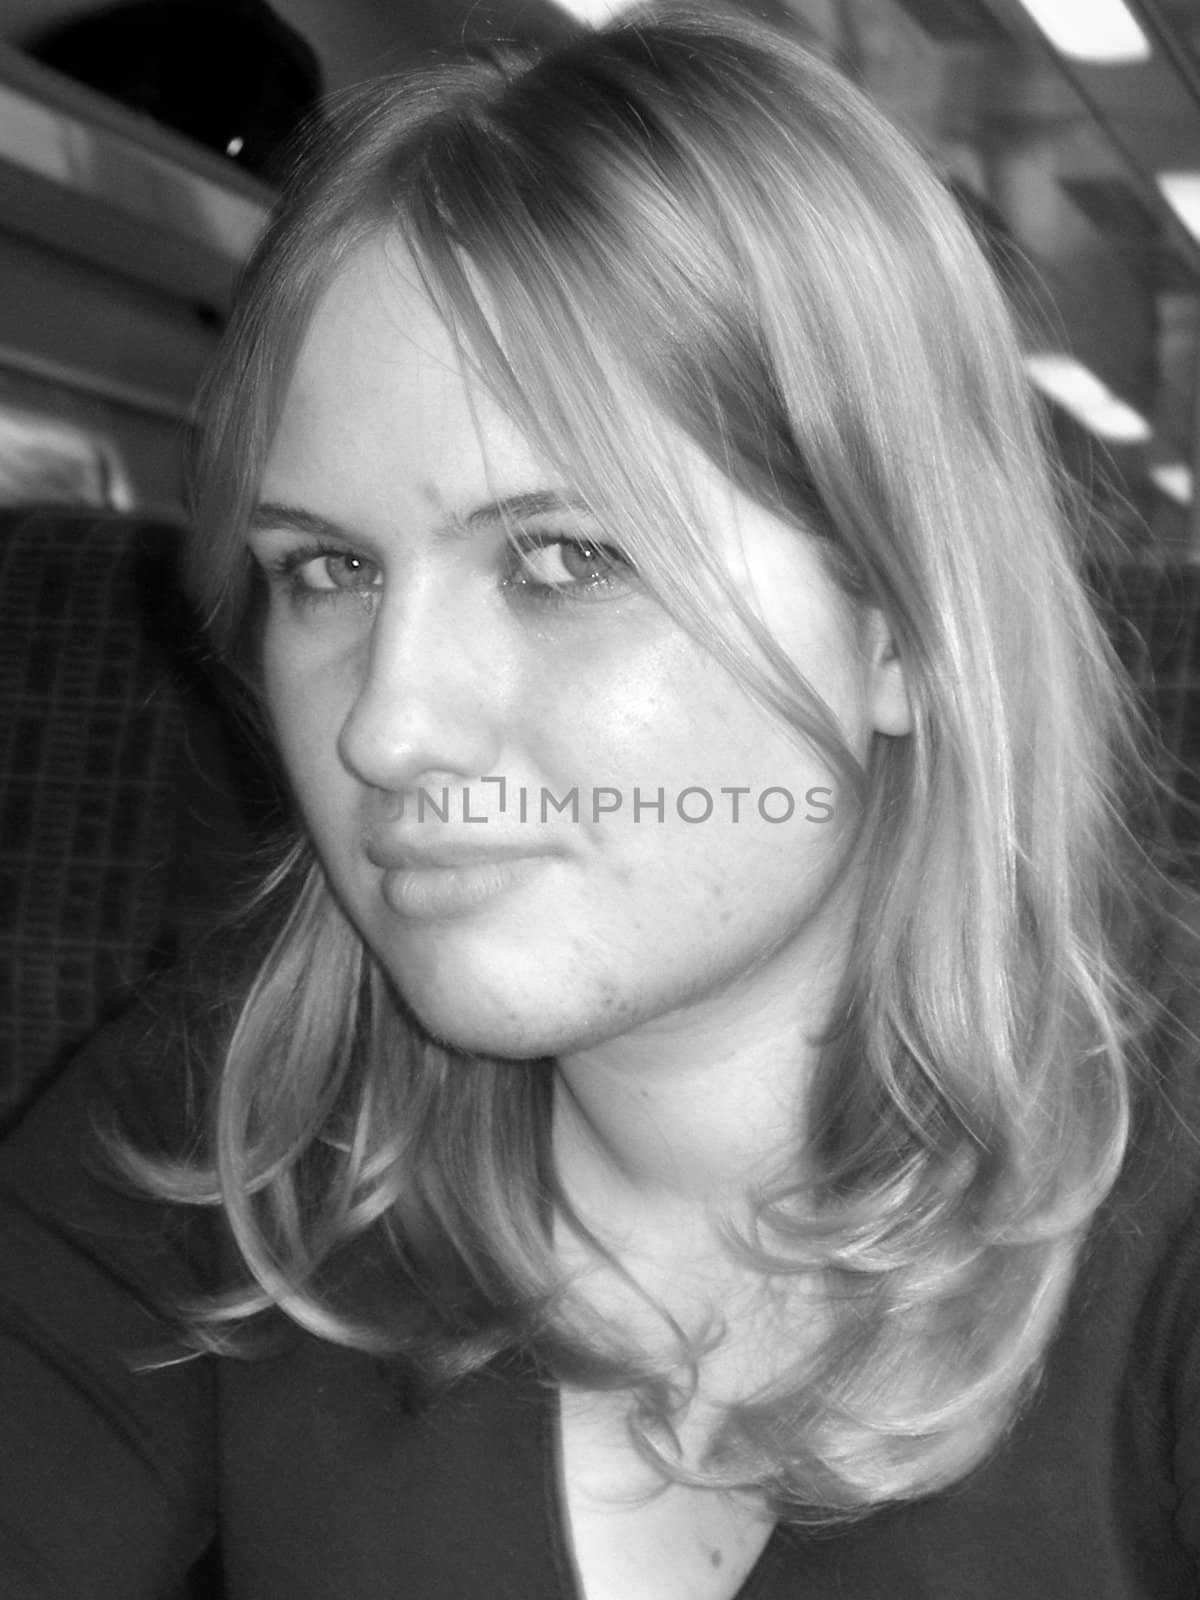 Victoria posing on a train in black and white.